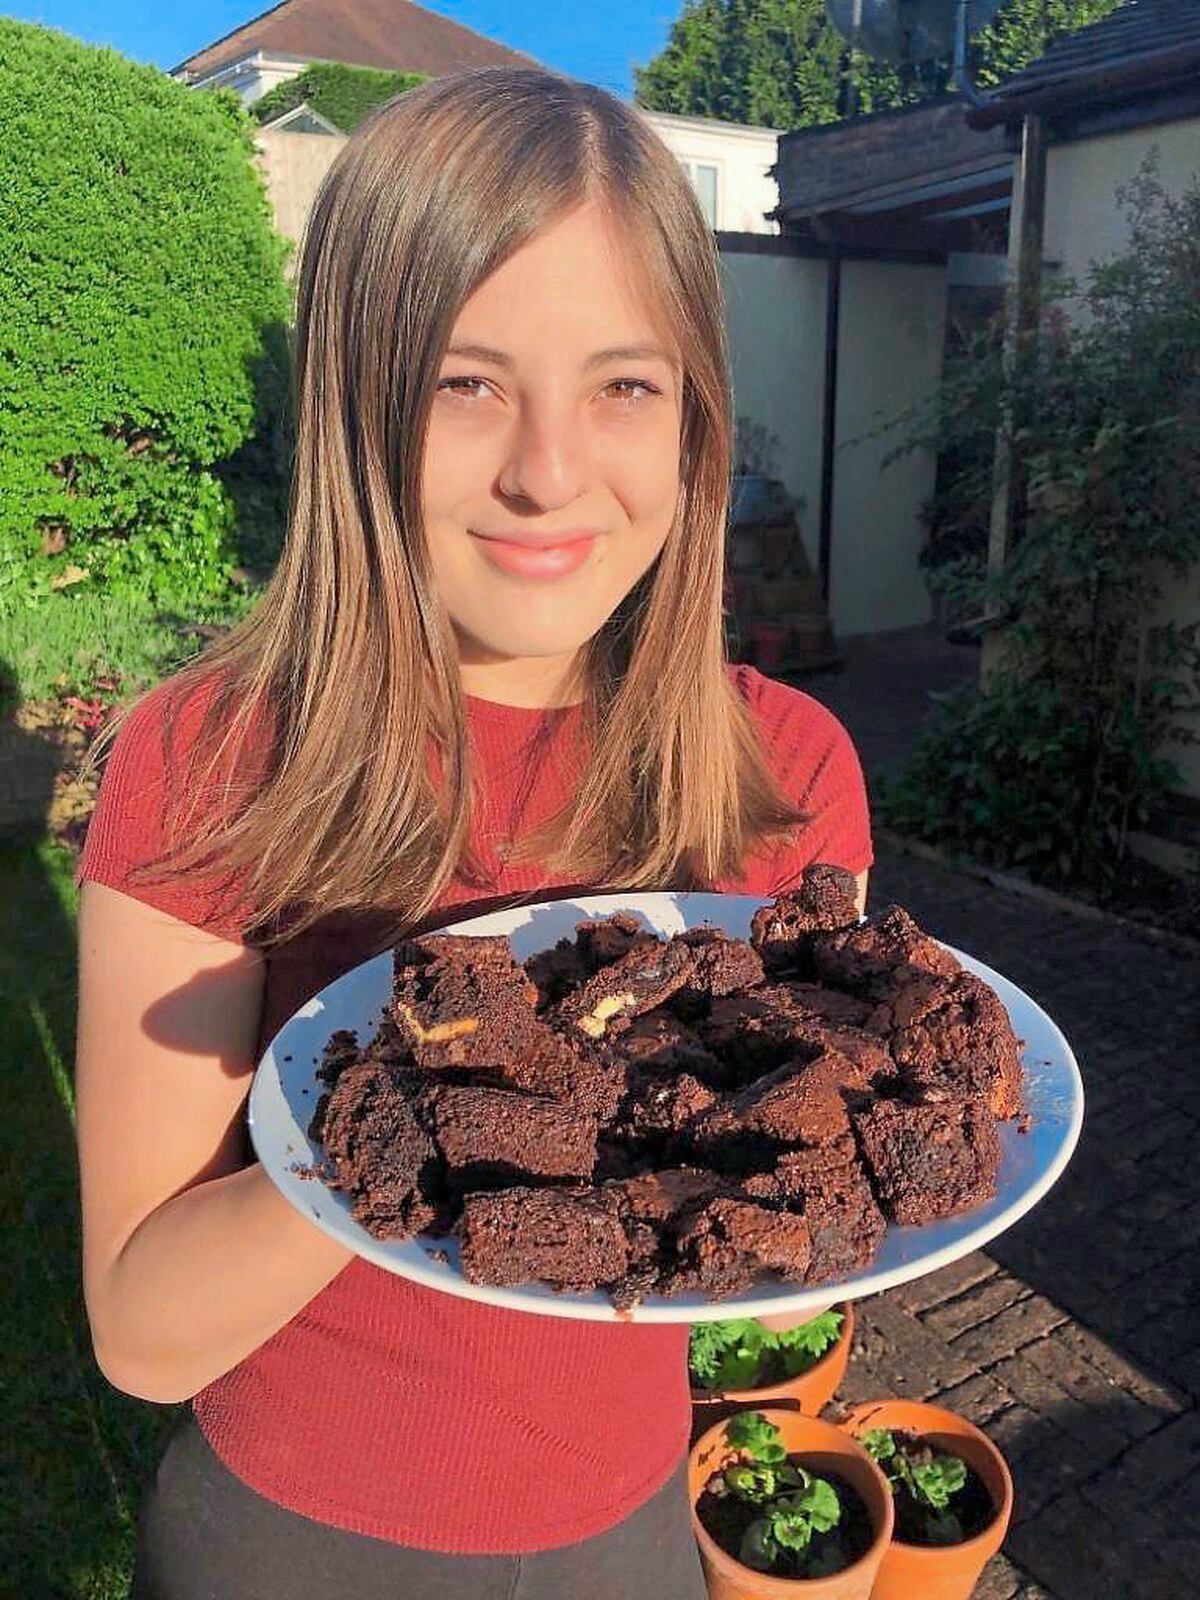 Jessica Drew with a plate of her brownies, made with white, milk and dark chocolate